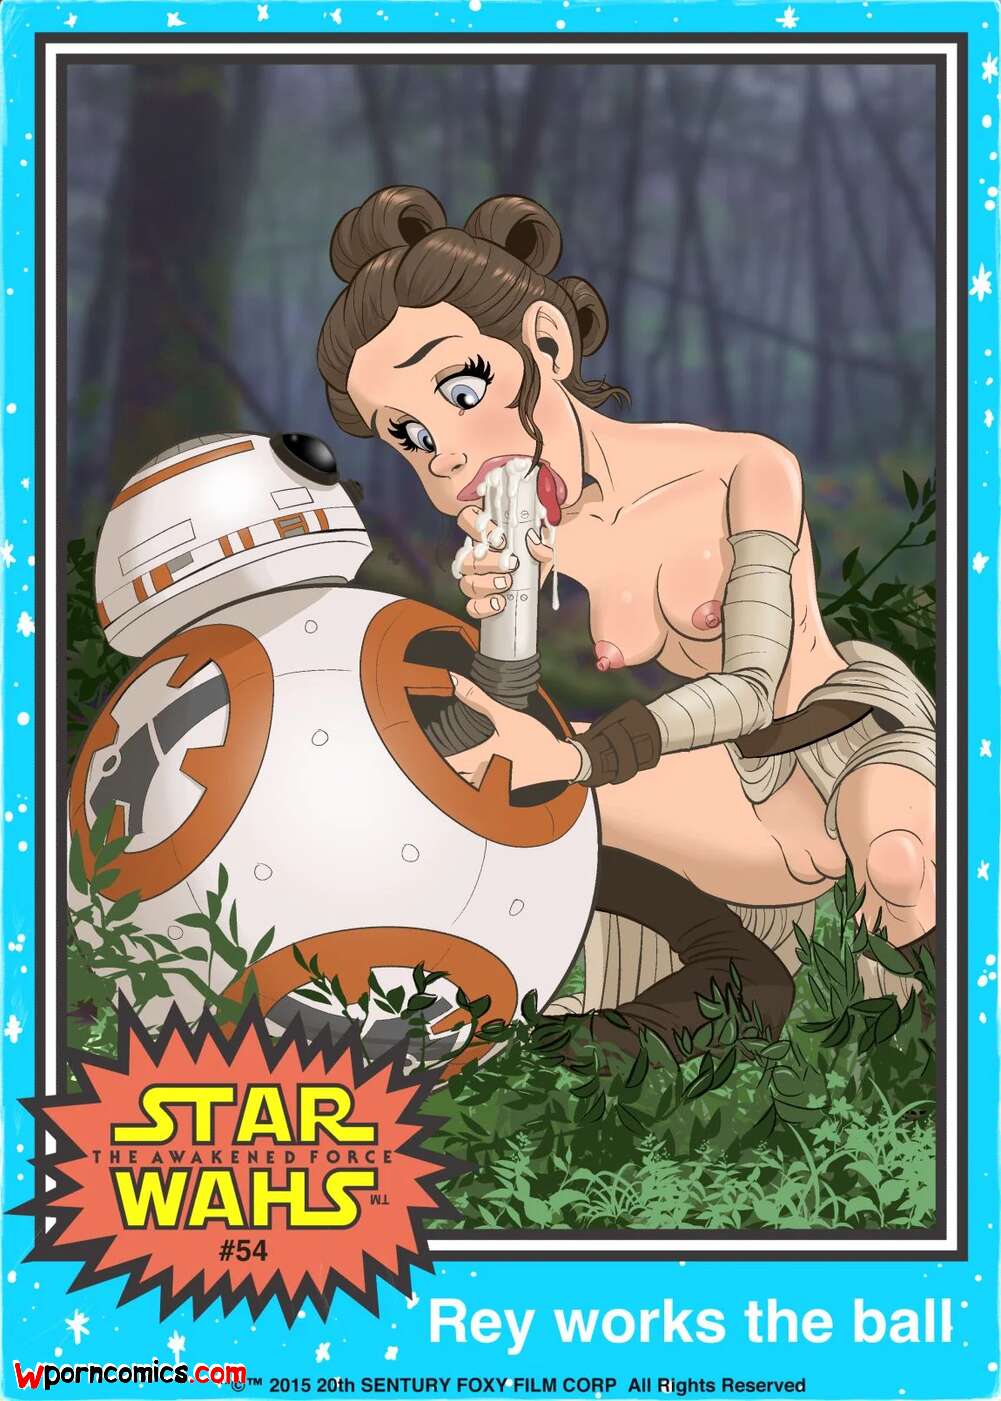 1001px x 1401px - ðŸ˜ˆ Porn comic Star Whore Force Cards. Star Wars. Sinope. Erotic comic much,  so she ðŸ˜ˆ | Porn comics hentai adult only | hqporncomics.com